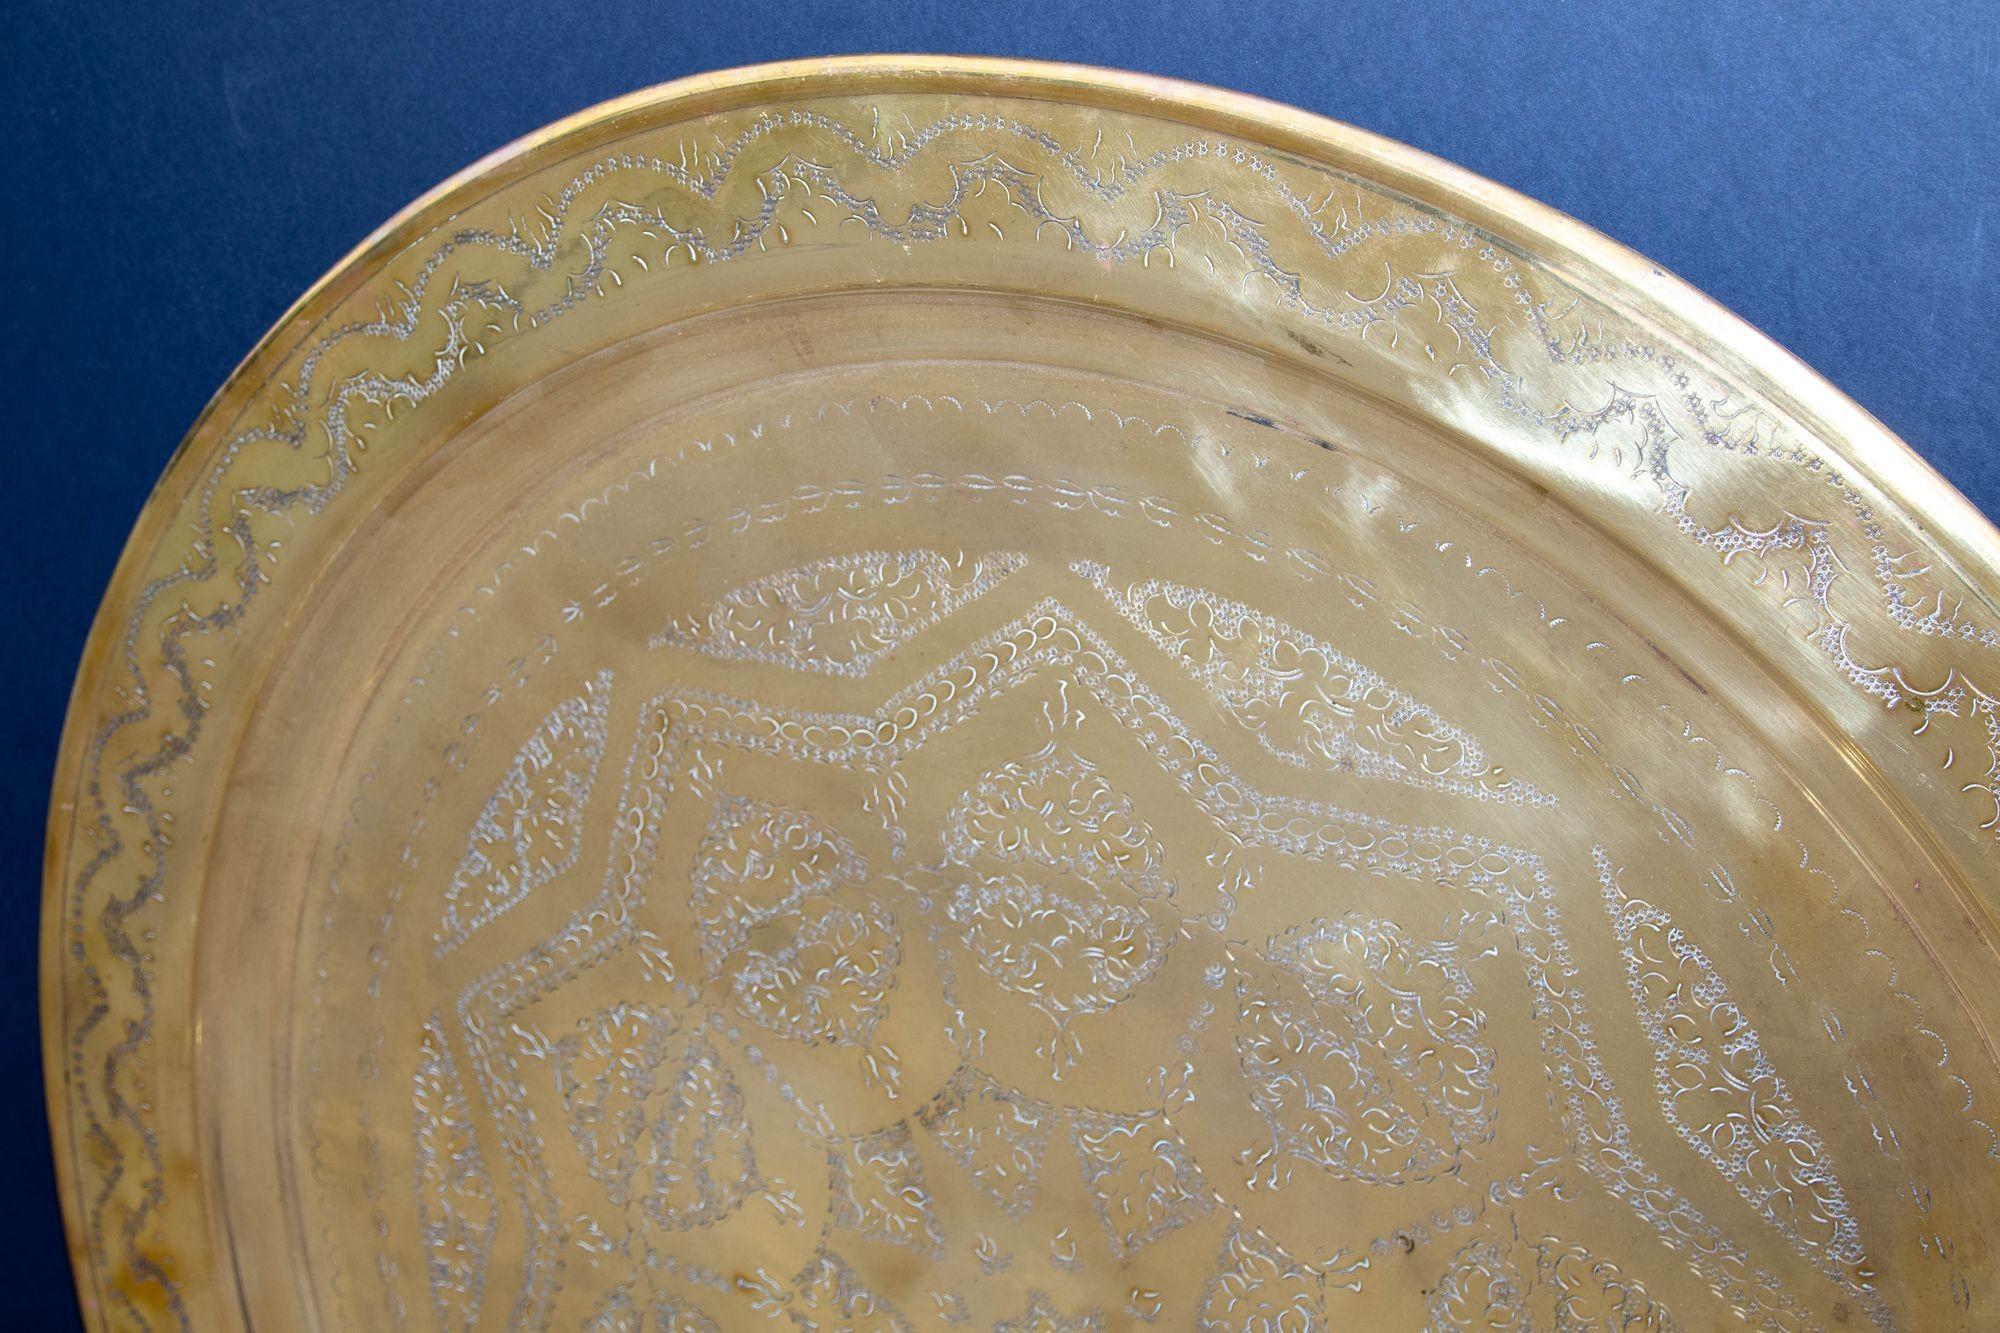 Antique Oversized Round Moroccan Polished Brass Tray Platter 19th C. For Sale 7